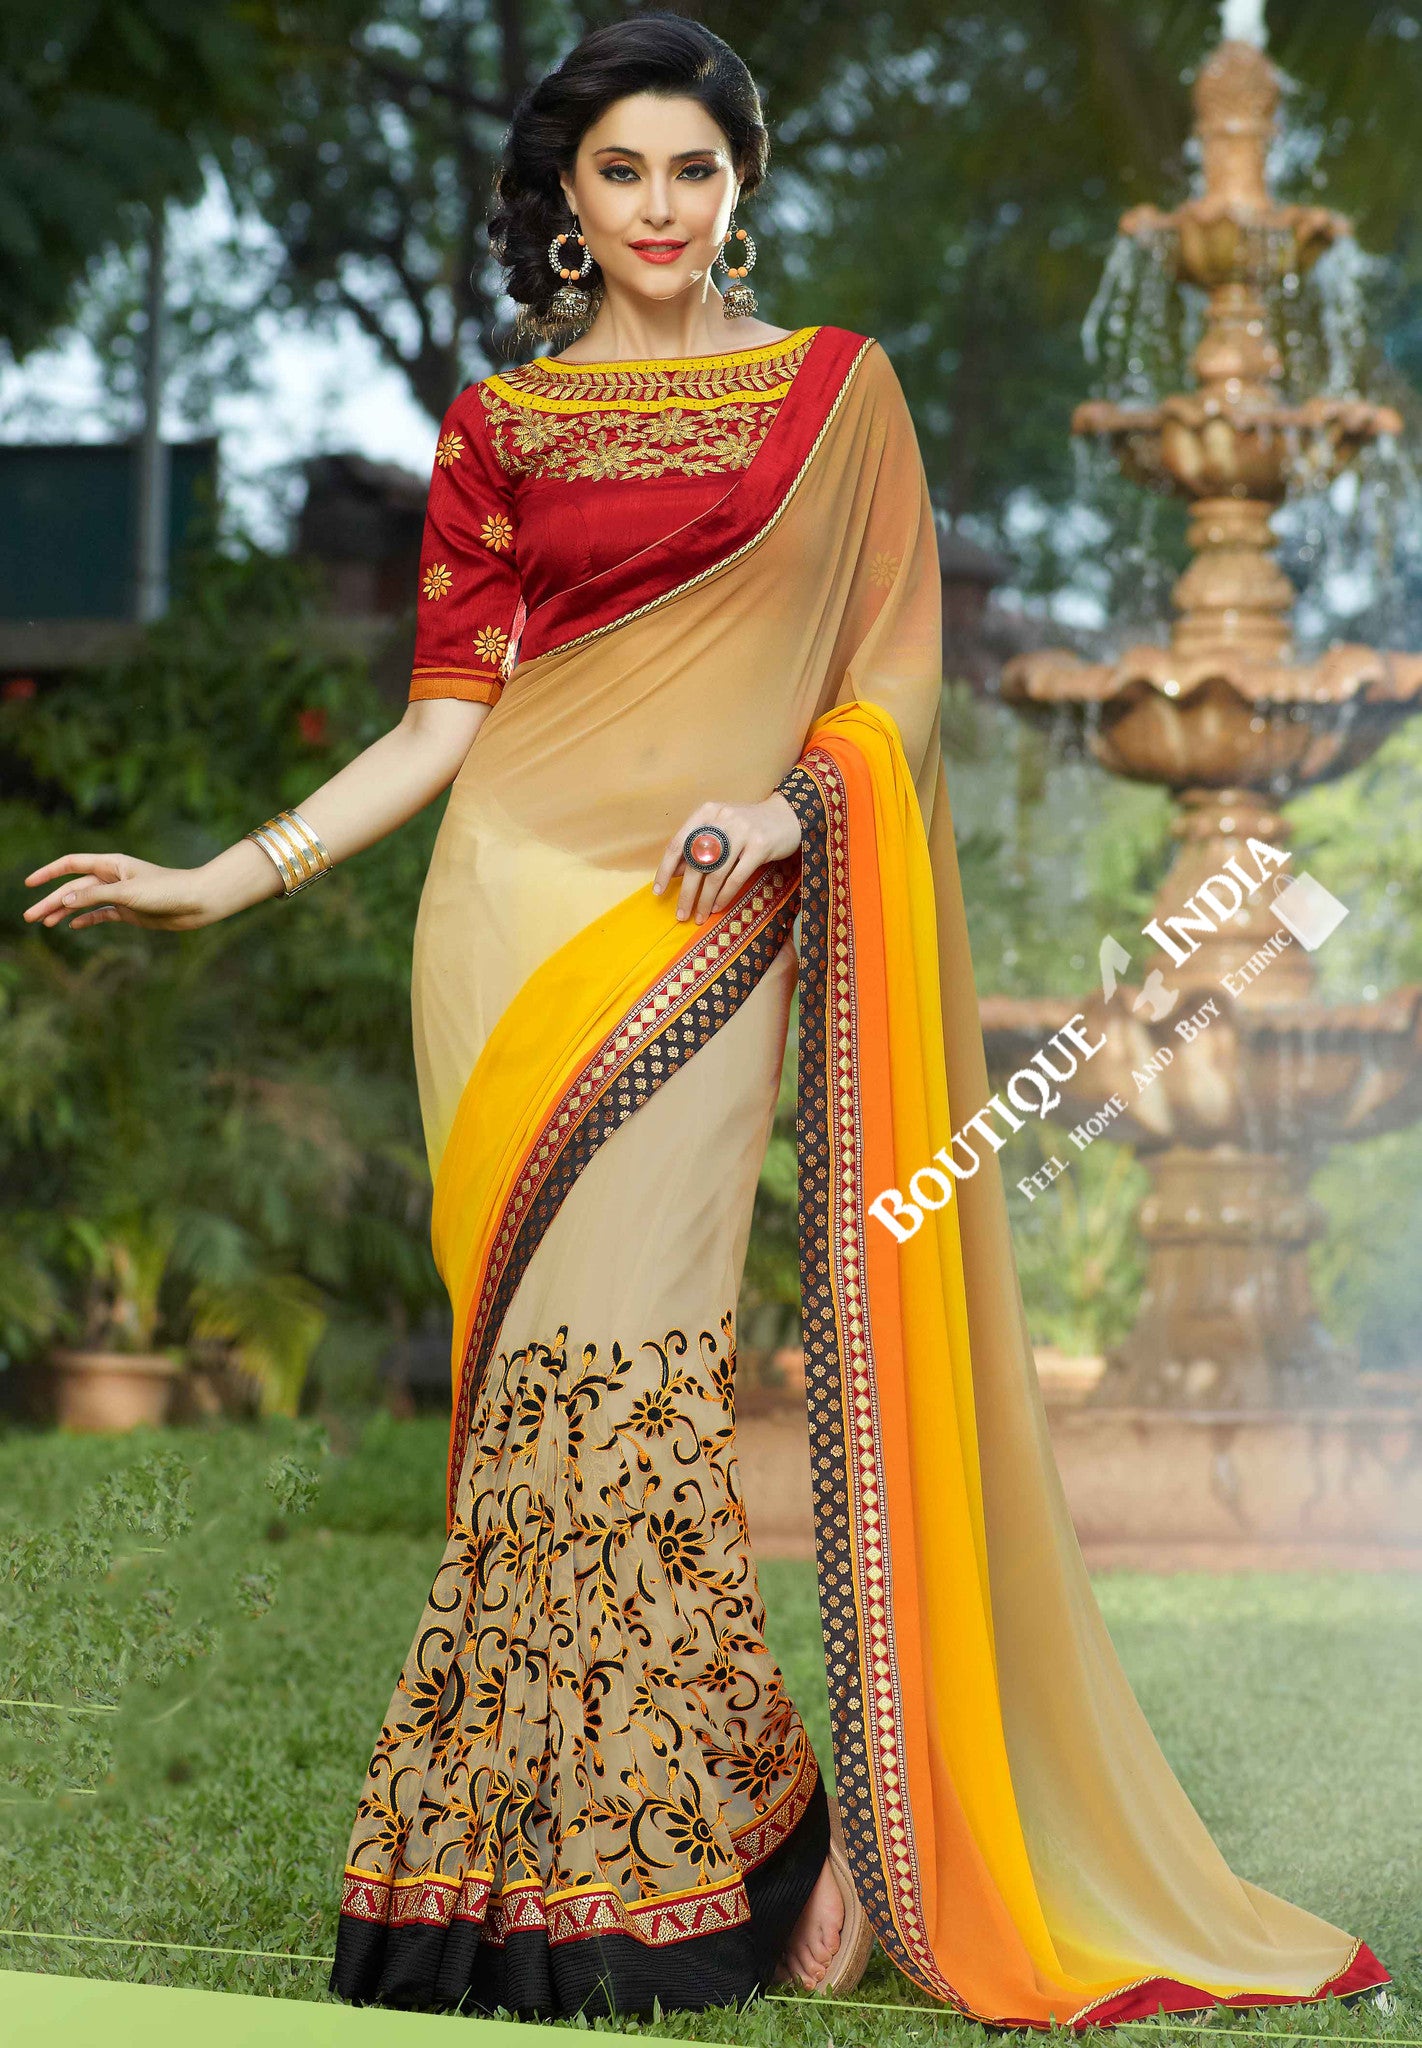 Net Faux Chiffon Saree with Orange Shades, Red and Golden - Boutique4India Inc.